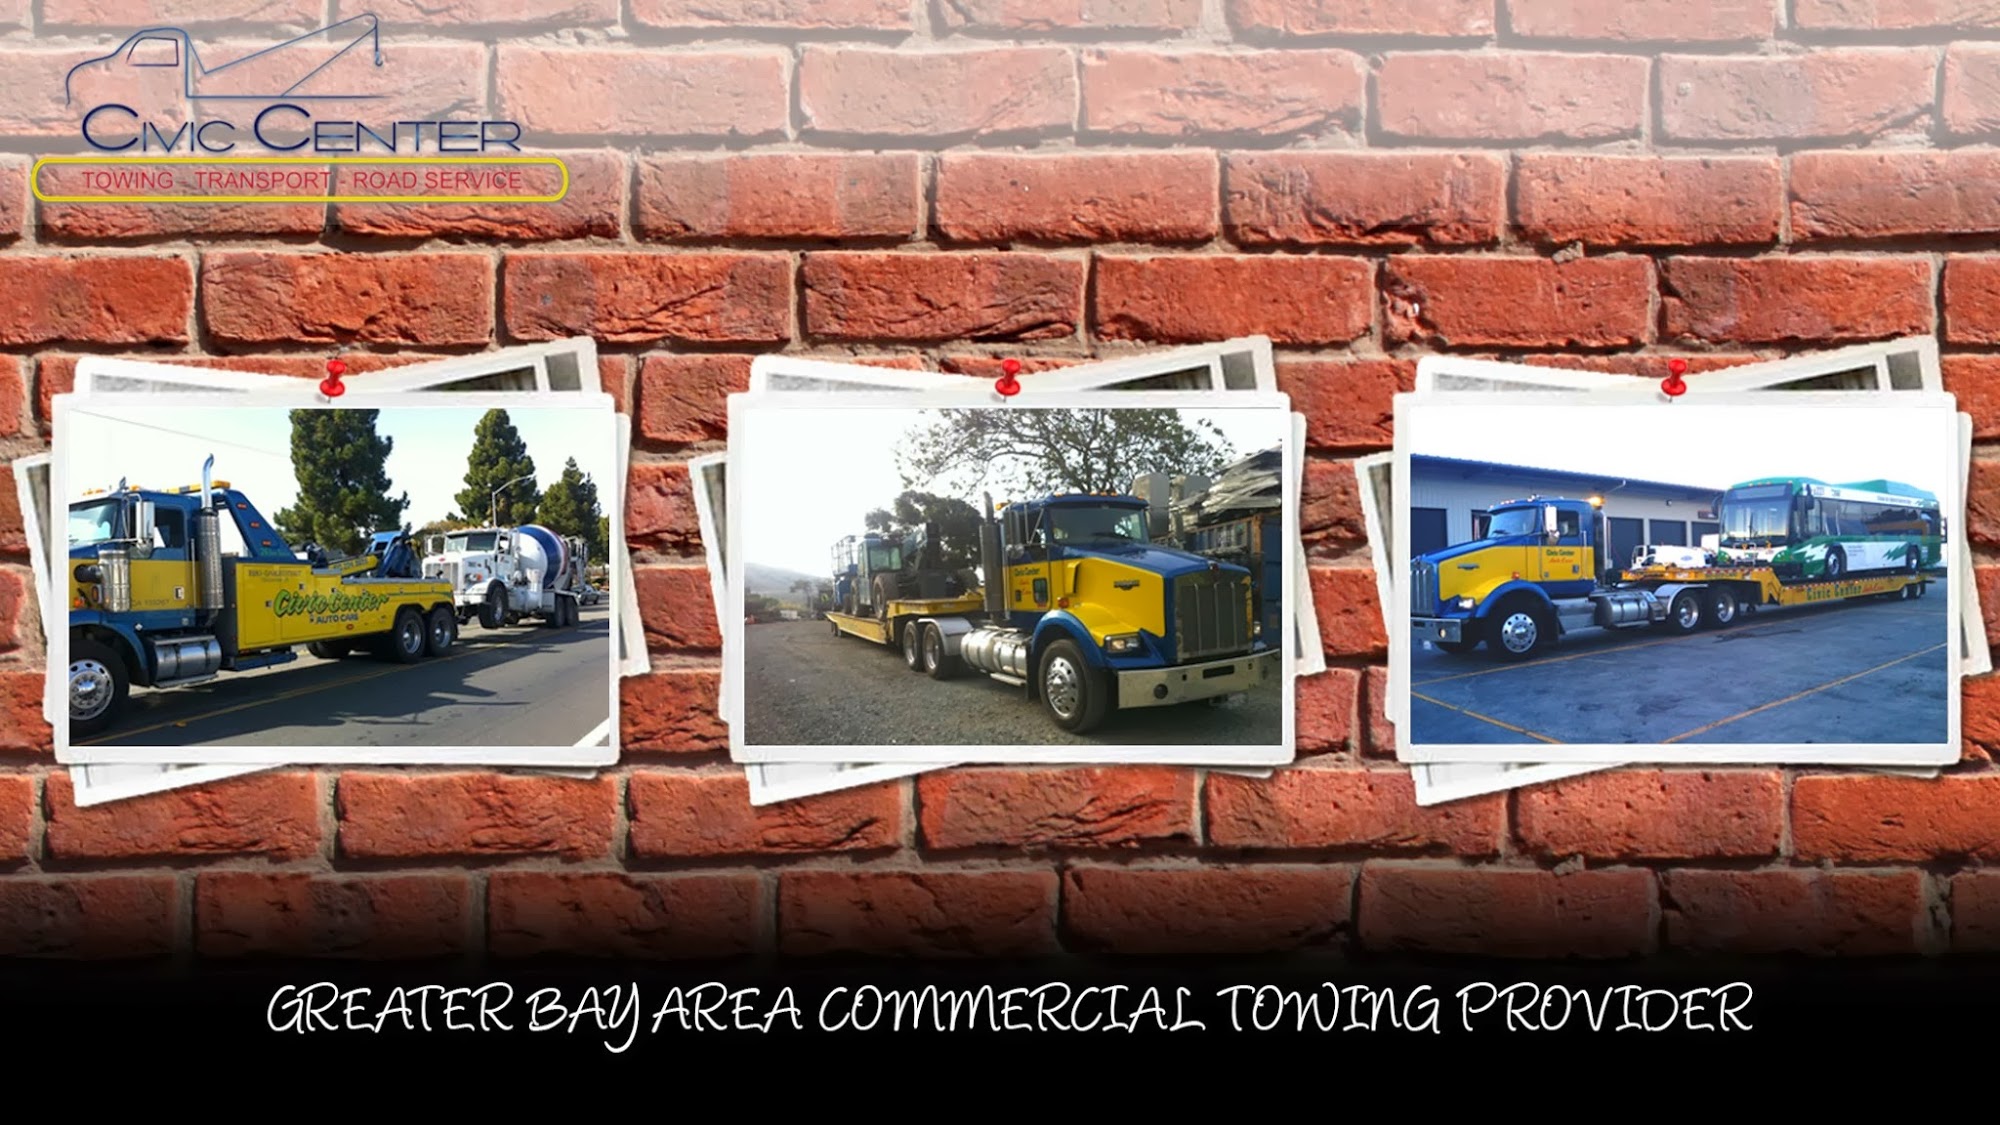 Civic Center Towing, Transport & Road Service